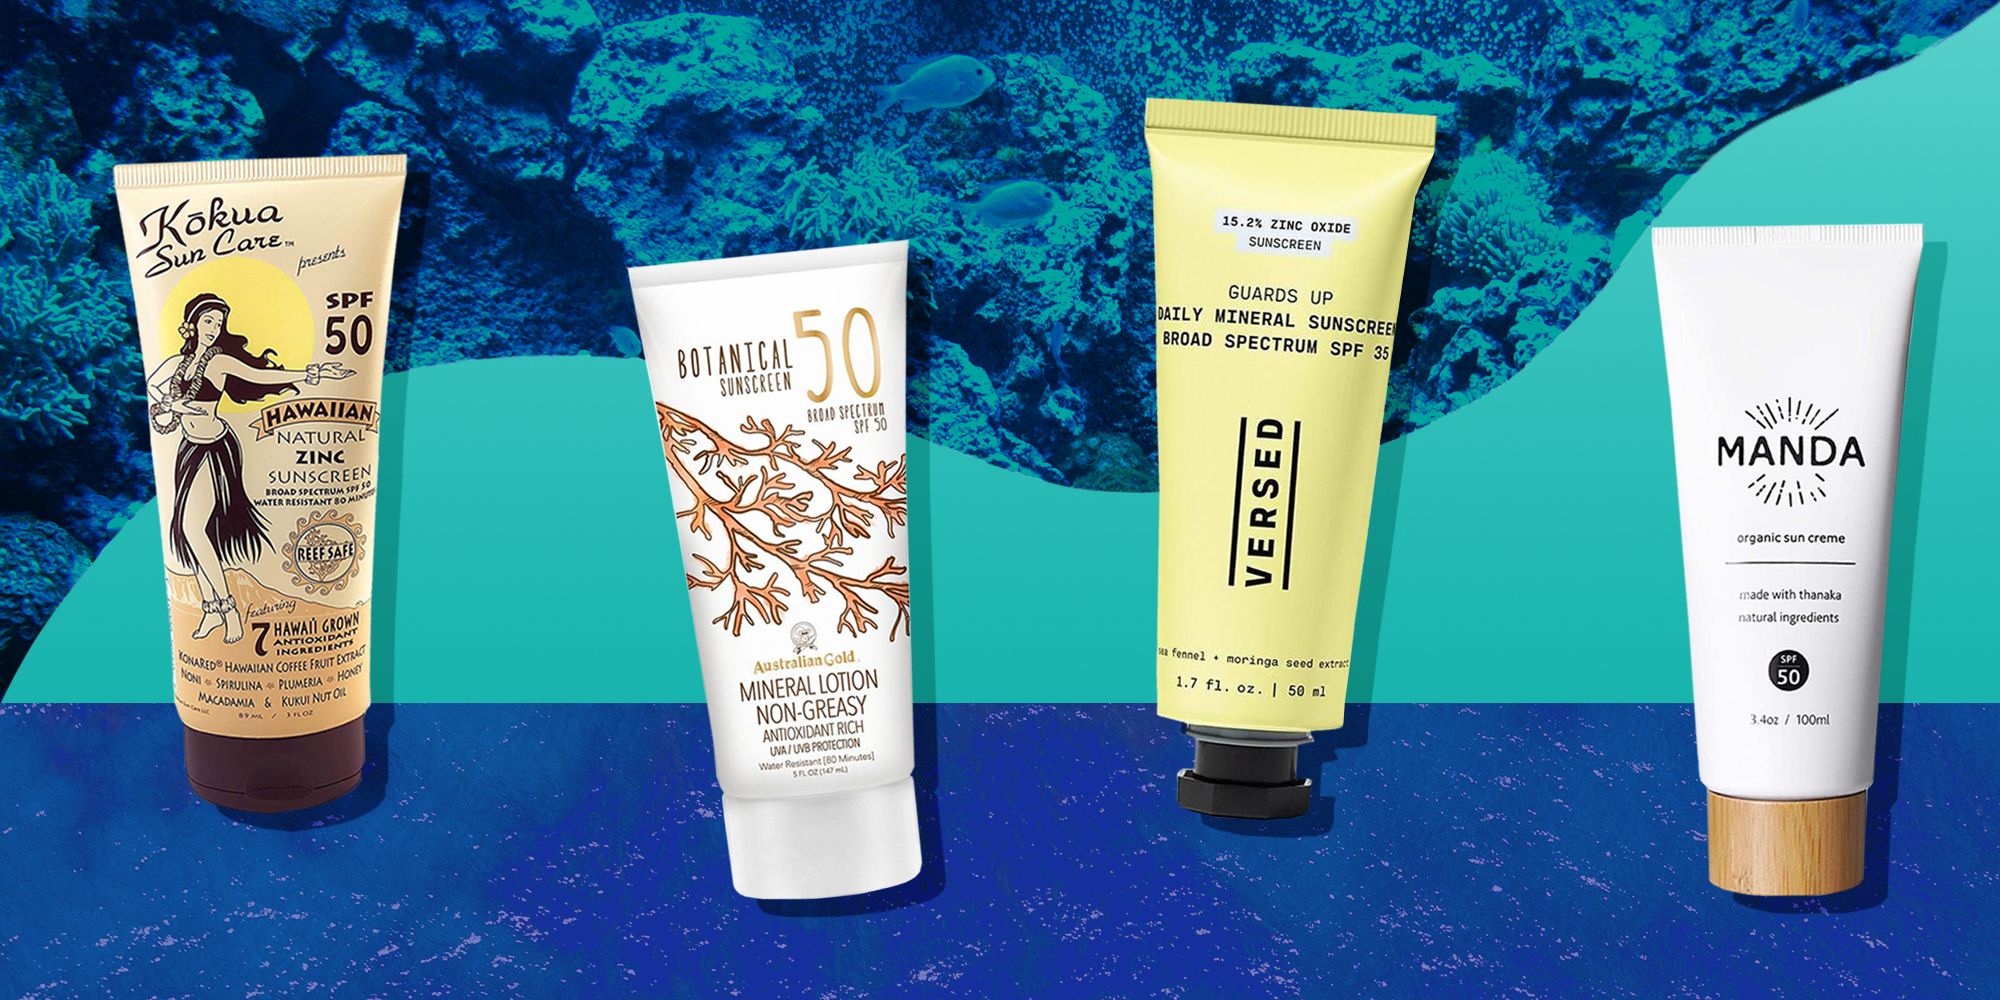 11 Best Reef-Safe Sunscreen Brands to Use in 2022